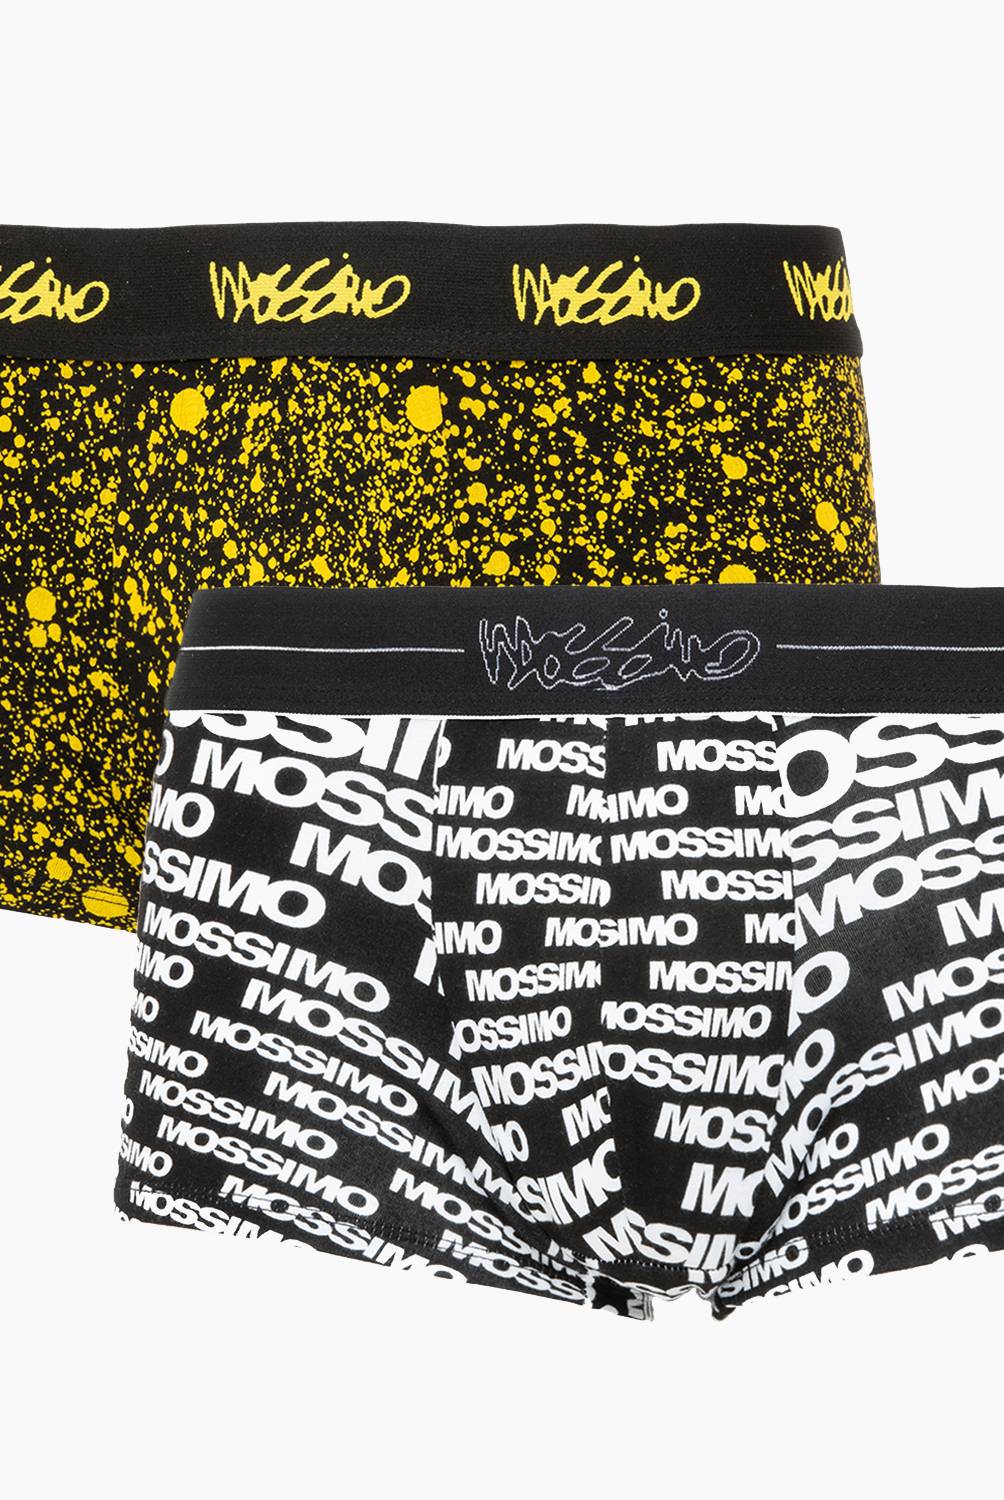 MOSSIMO - Pack Boxers